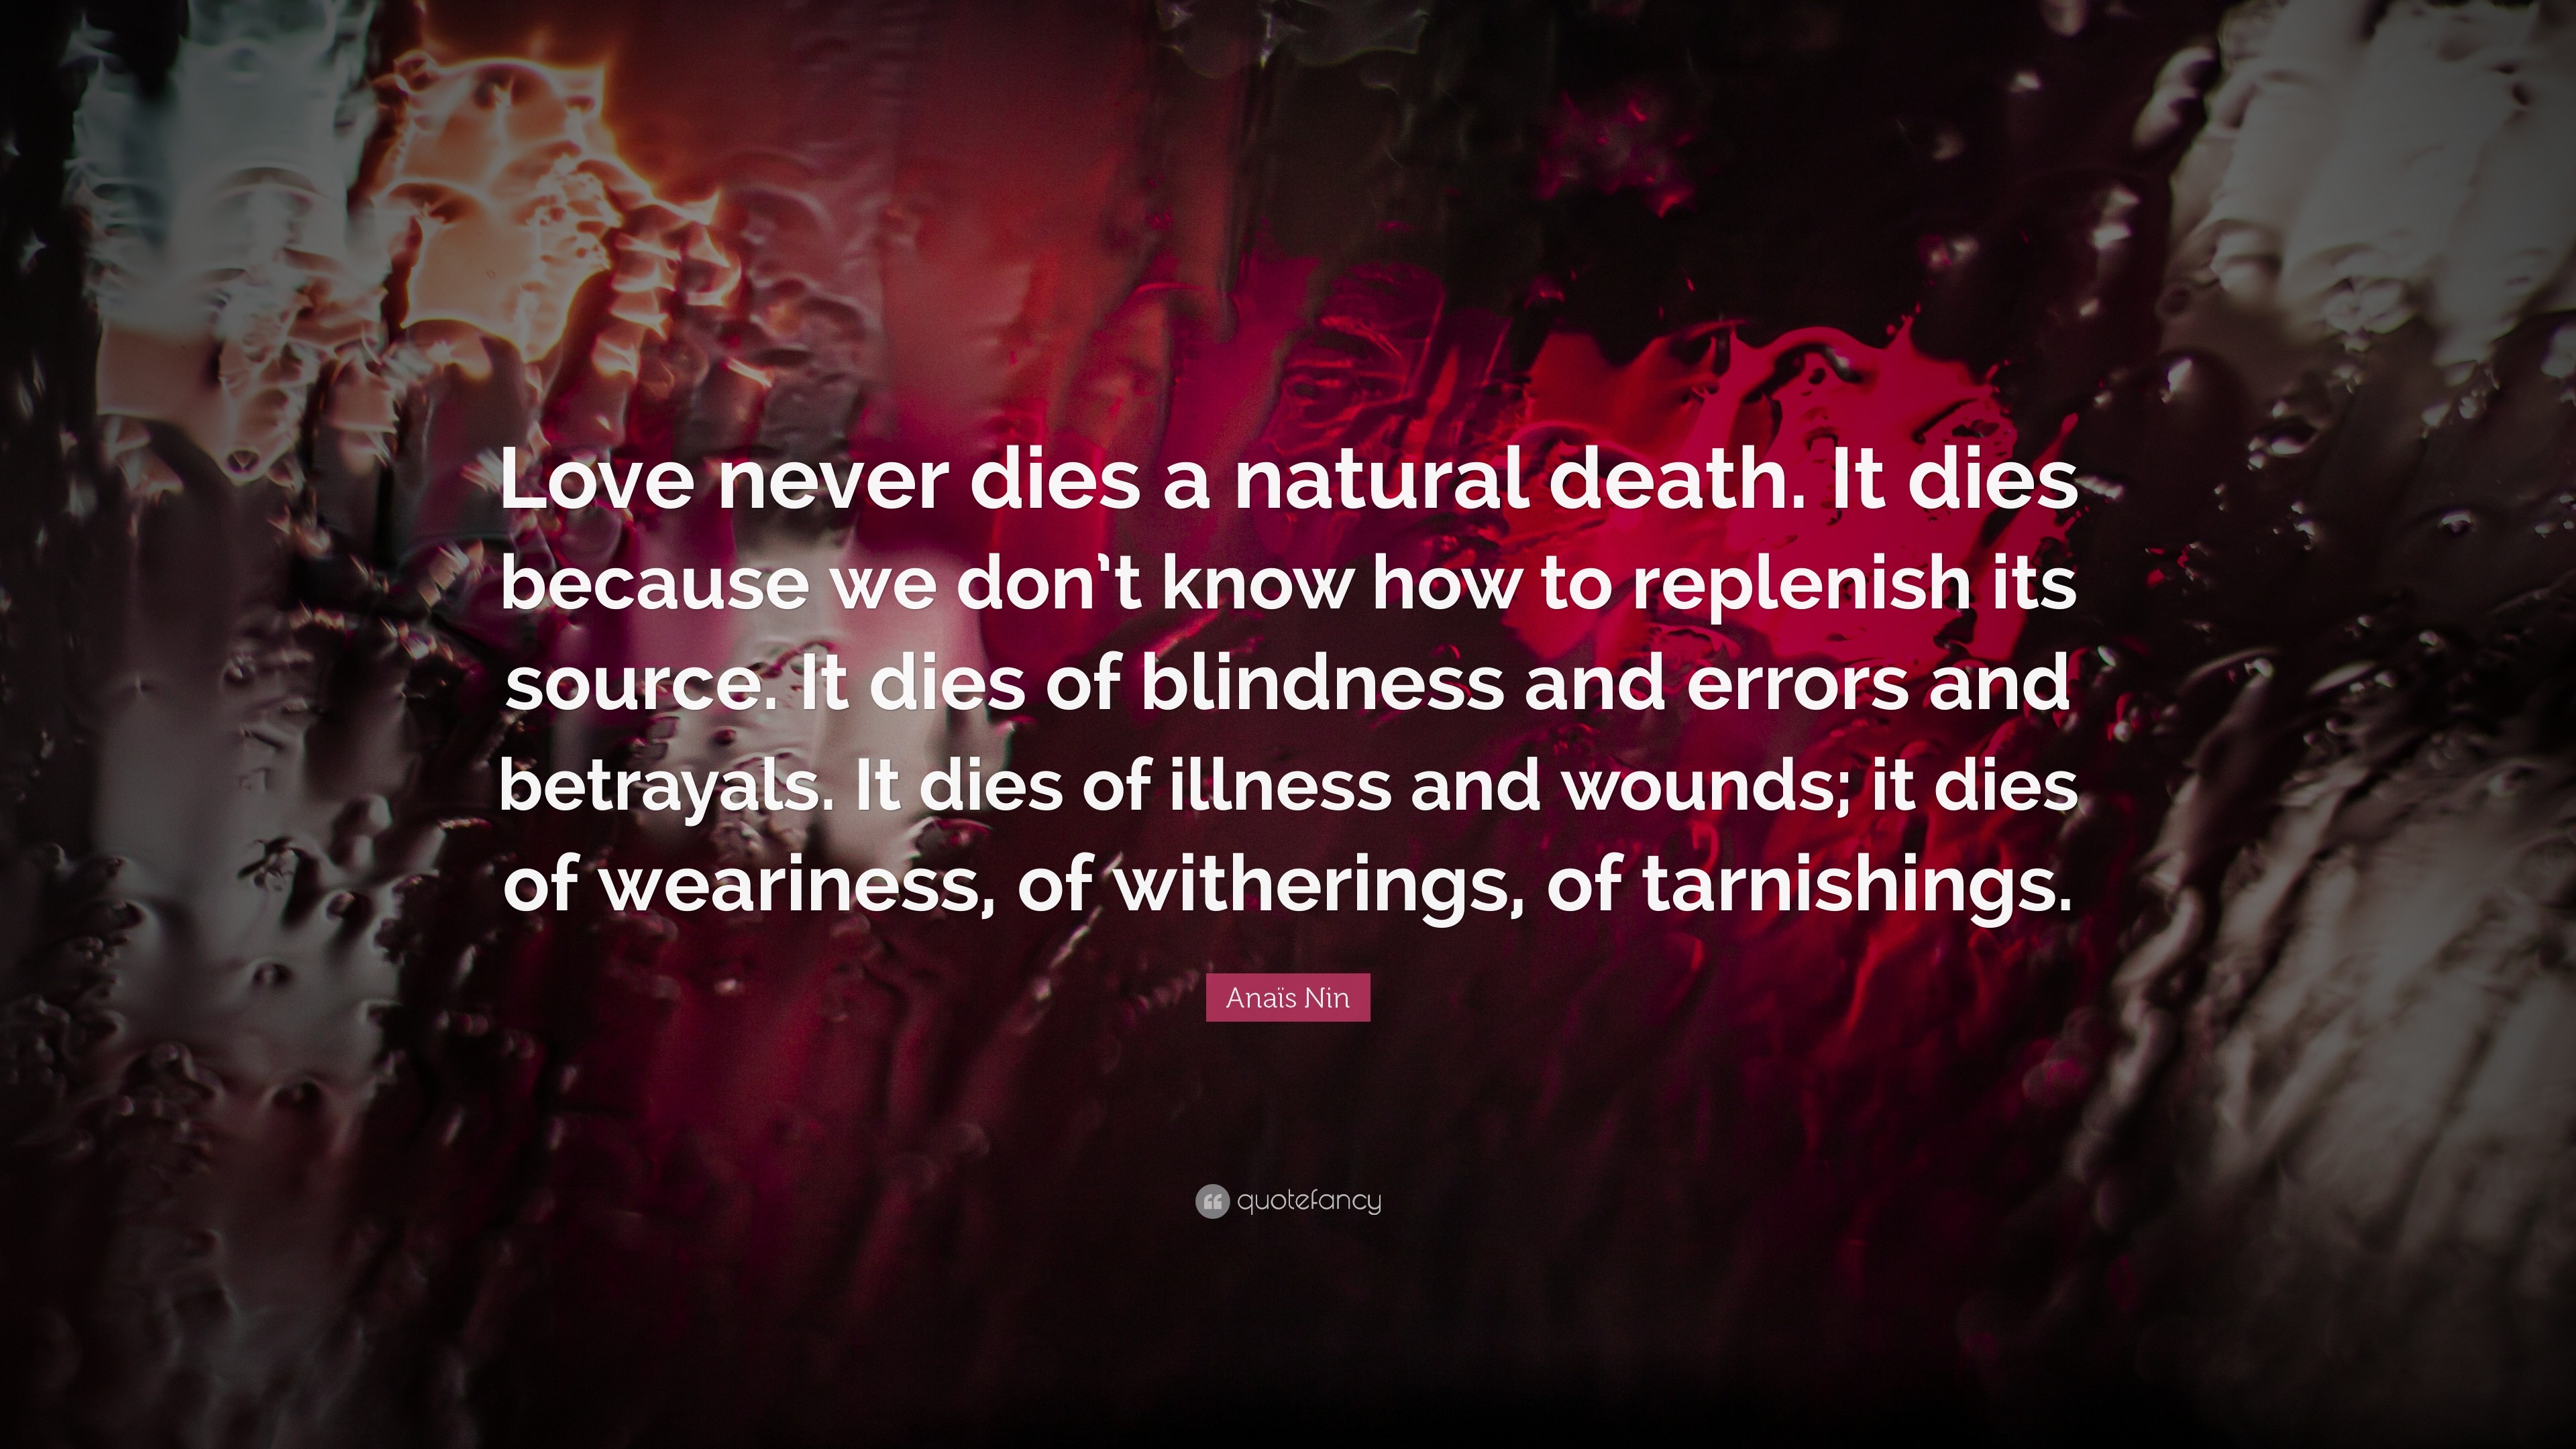 3840x2160 AnaÃ¯s Nin Quote: “Love never dies a natural death. It dies because we